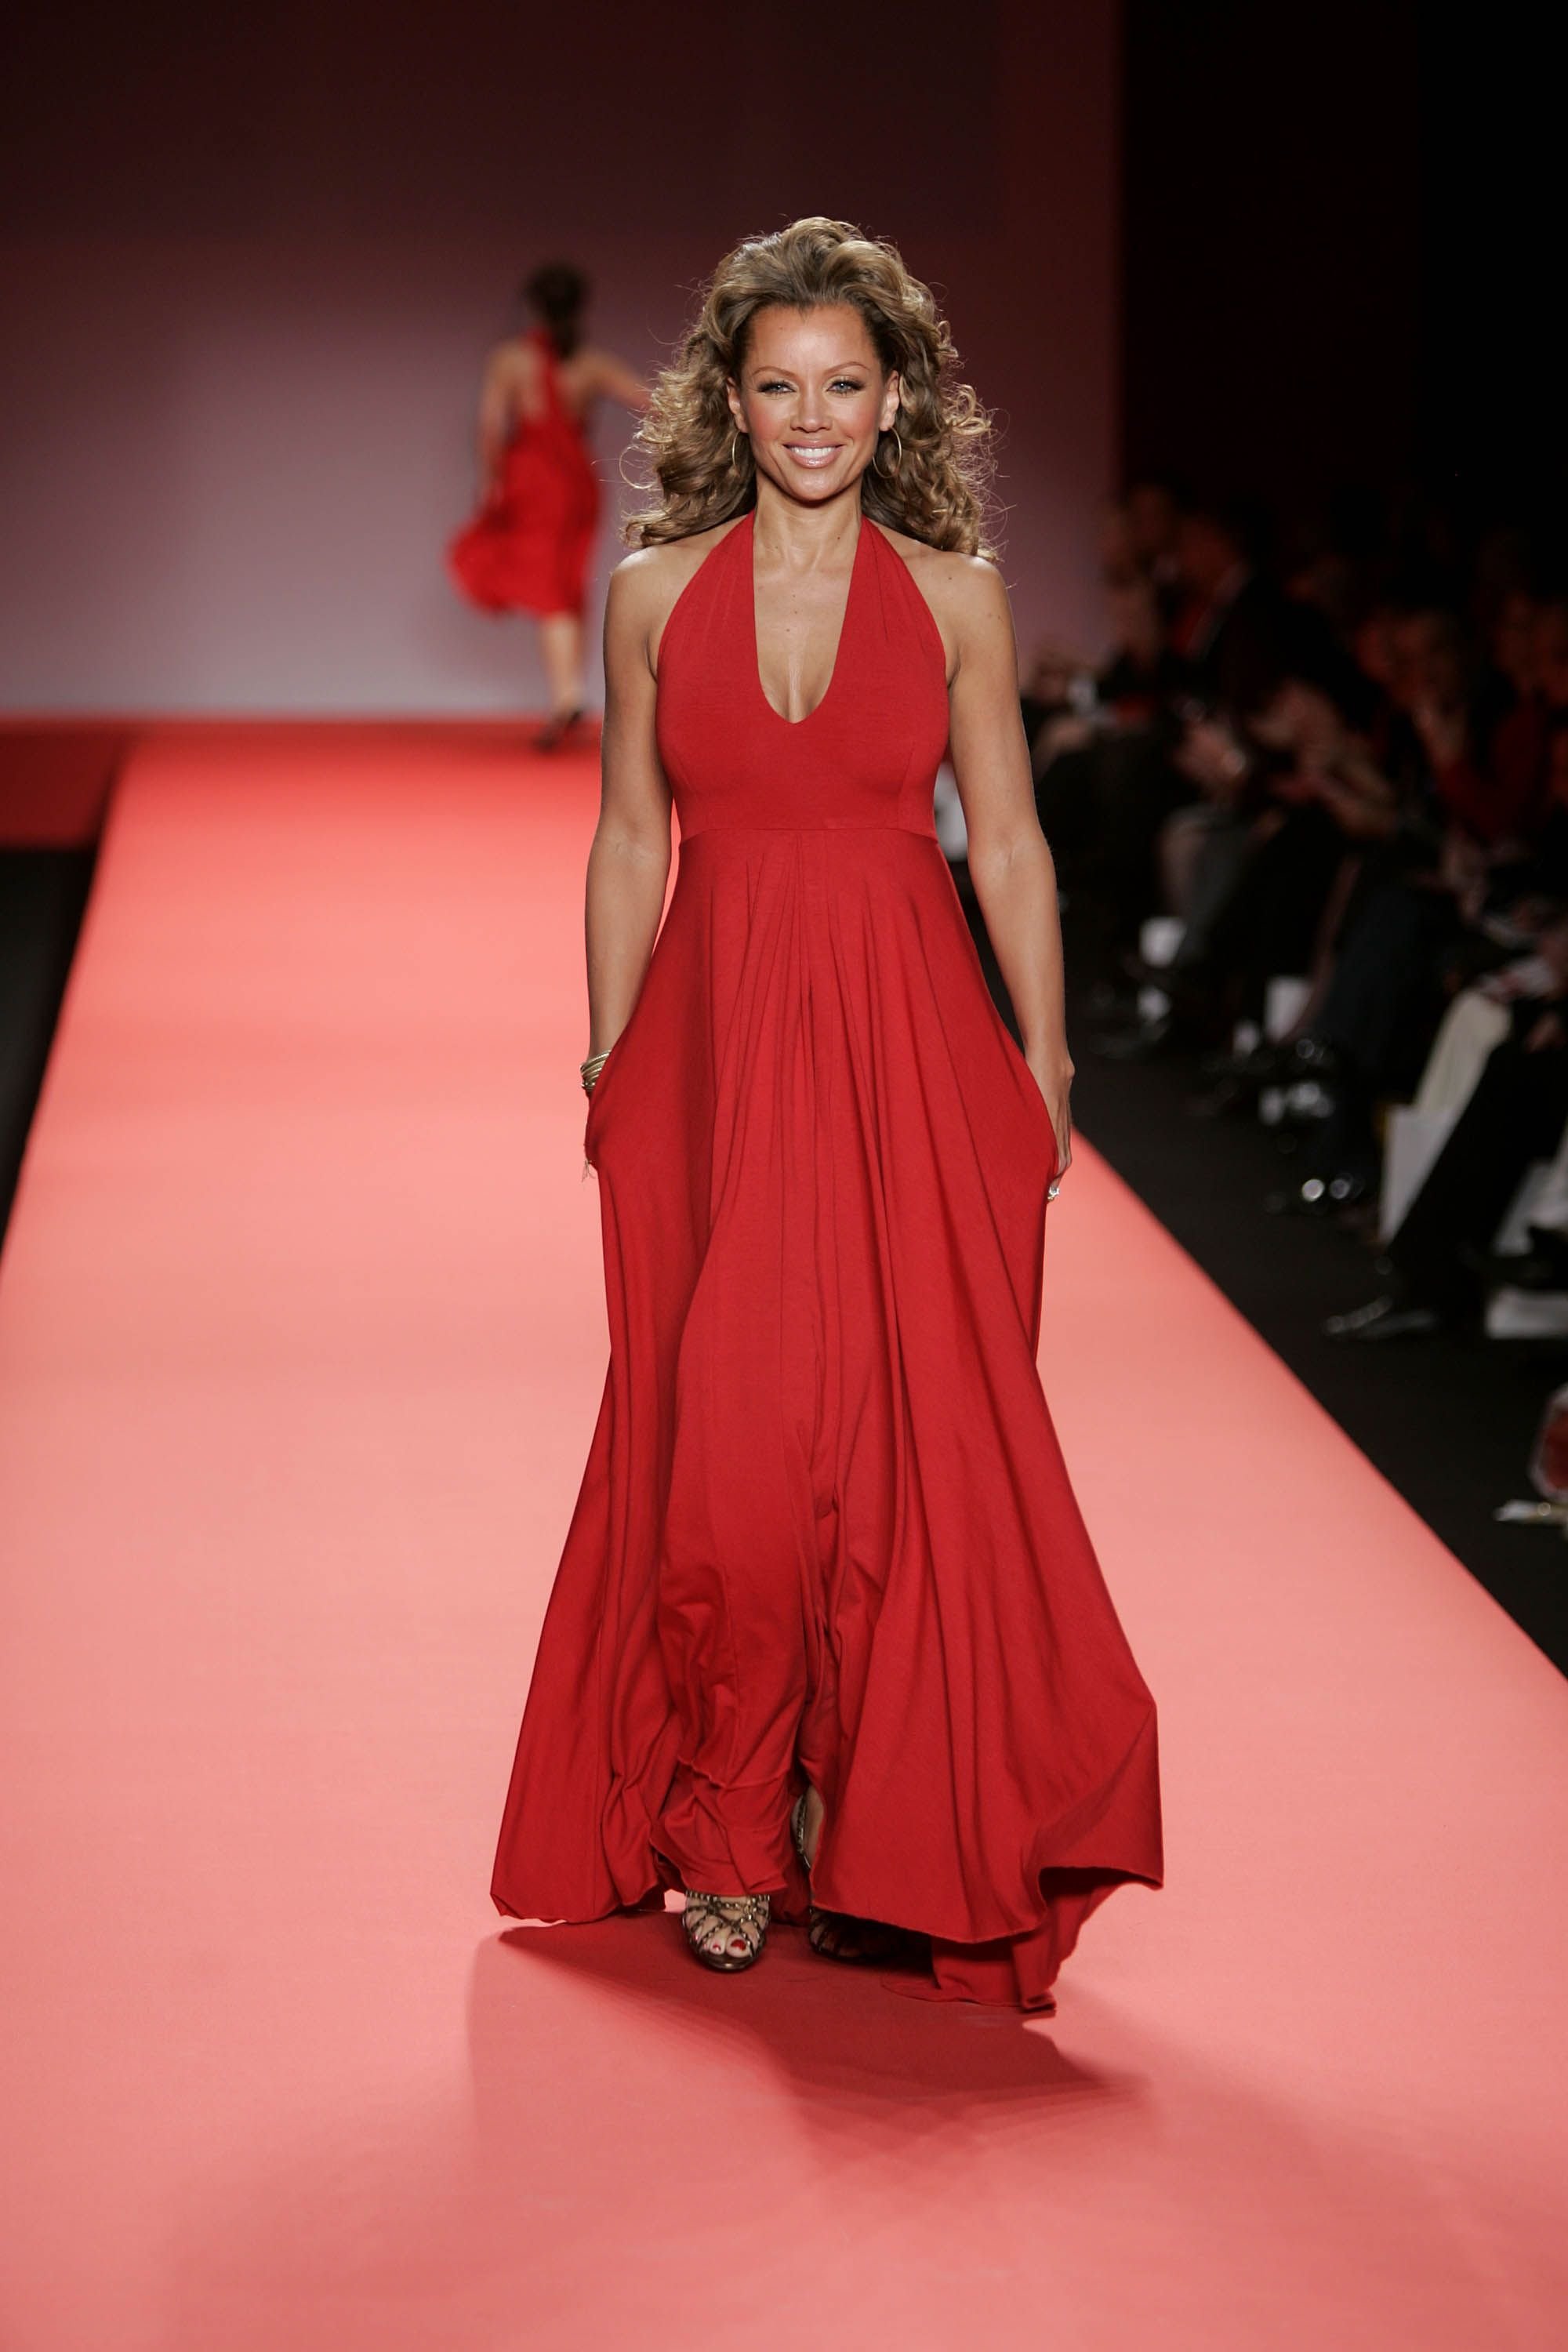 Vanessa Williams walks the runway at the Heart Truth Red Dress Collection during the Olympus Fashion Week at Bryant Park on February 4, 2004 in New York City. | Source: Getty Images